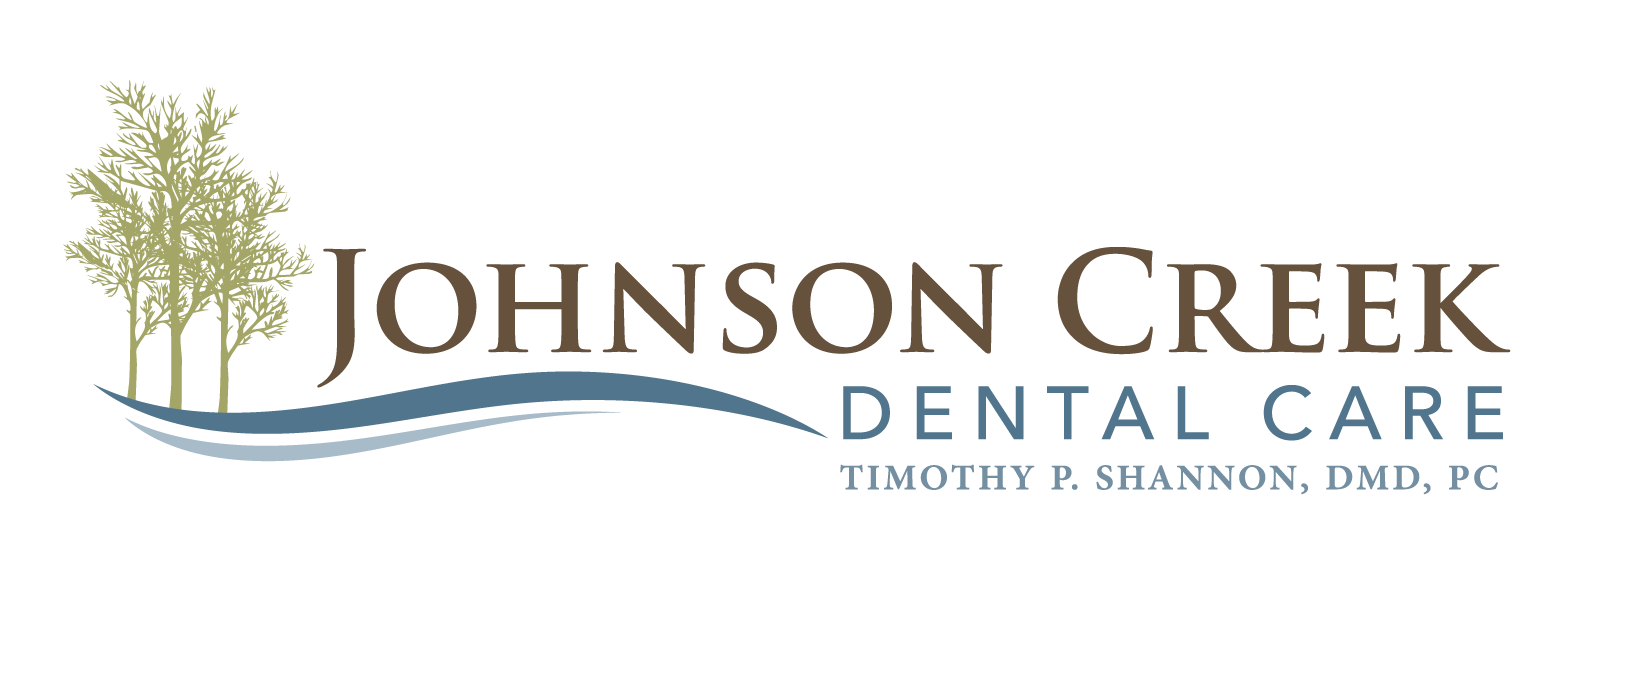 Link to Johnson Creek Dental Care home page